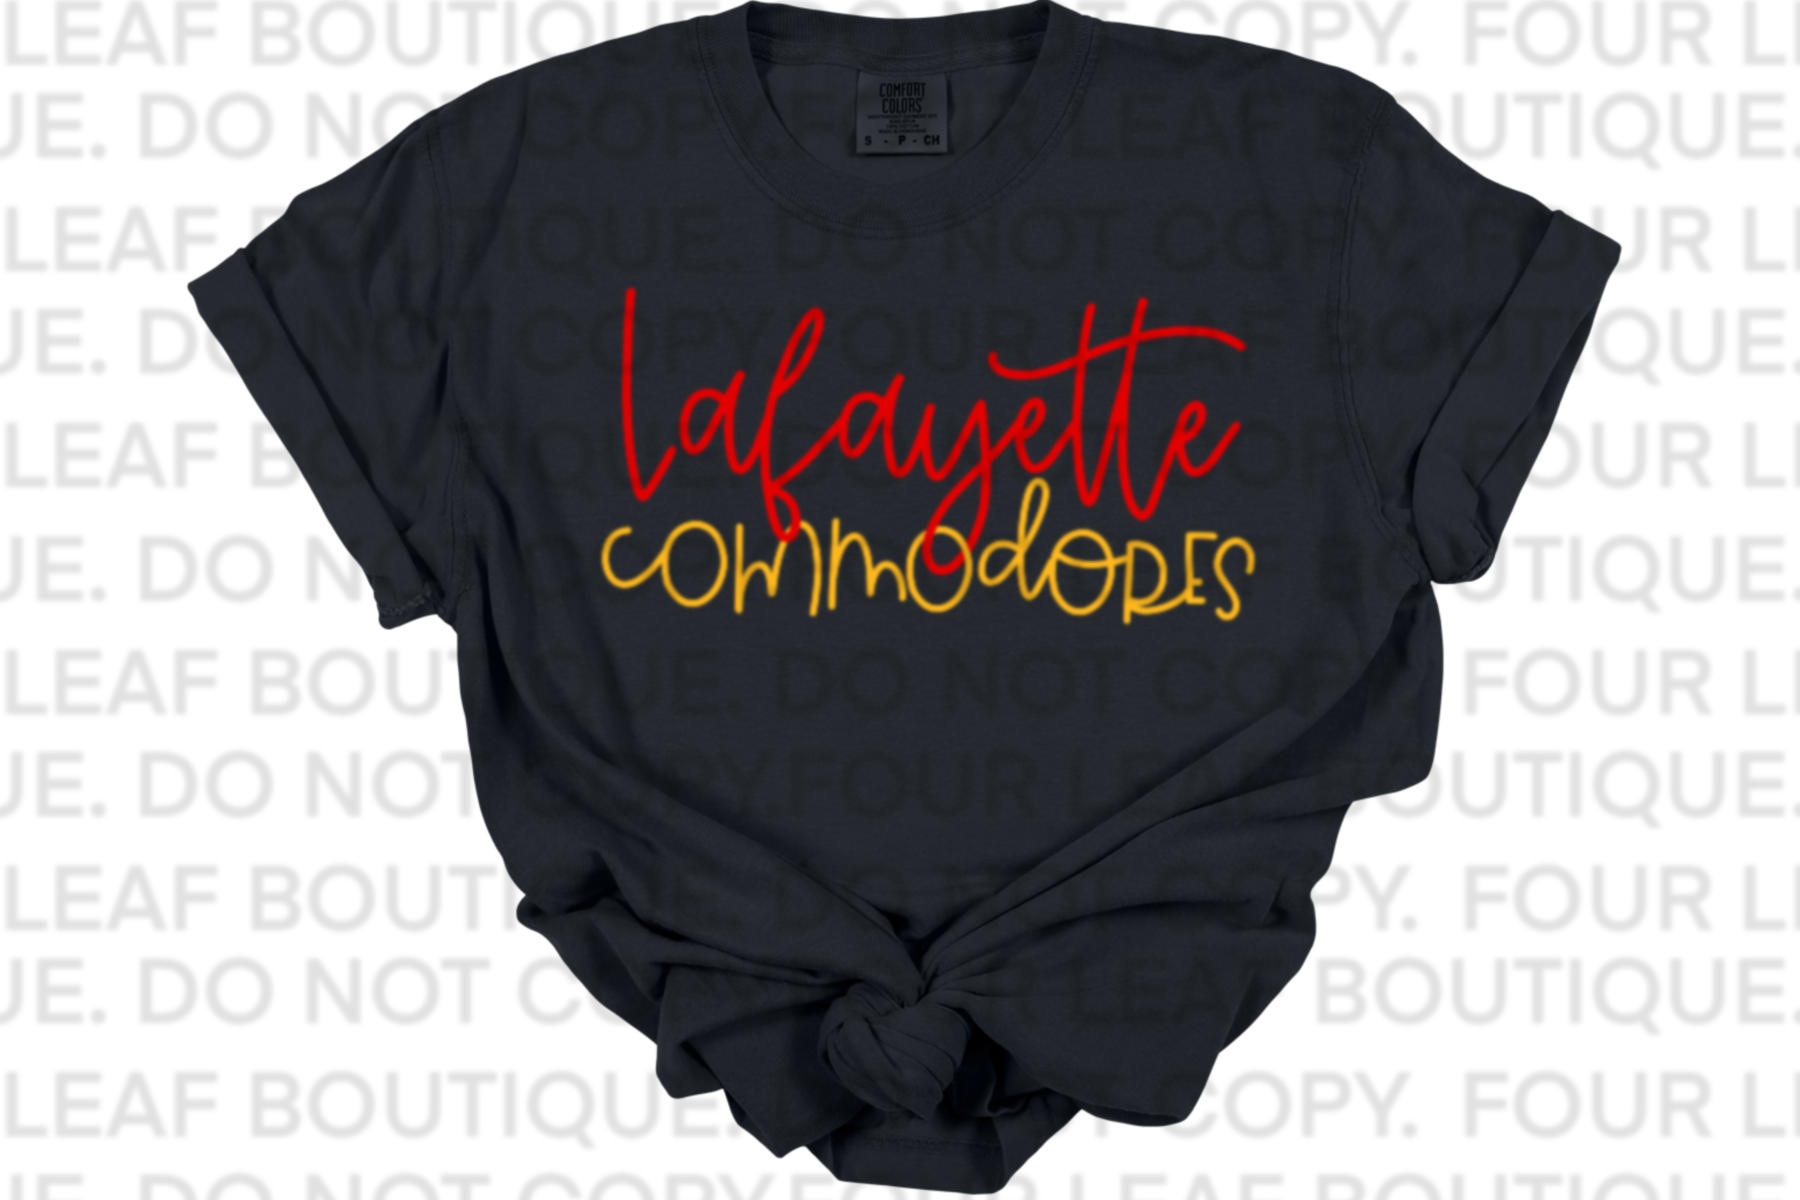 Lafayette Commodores (red/yellow)